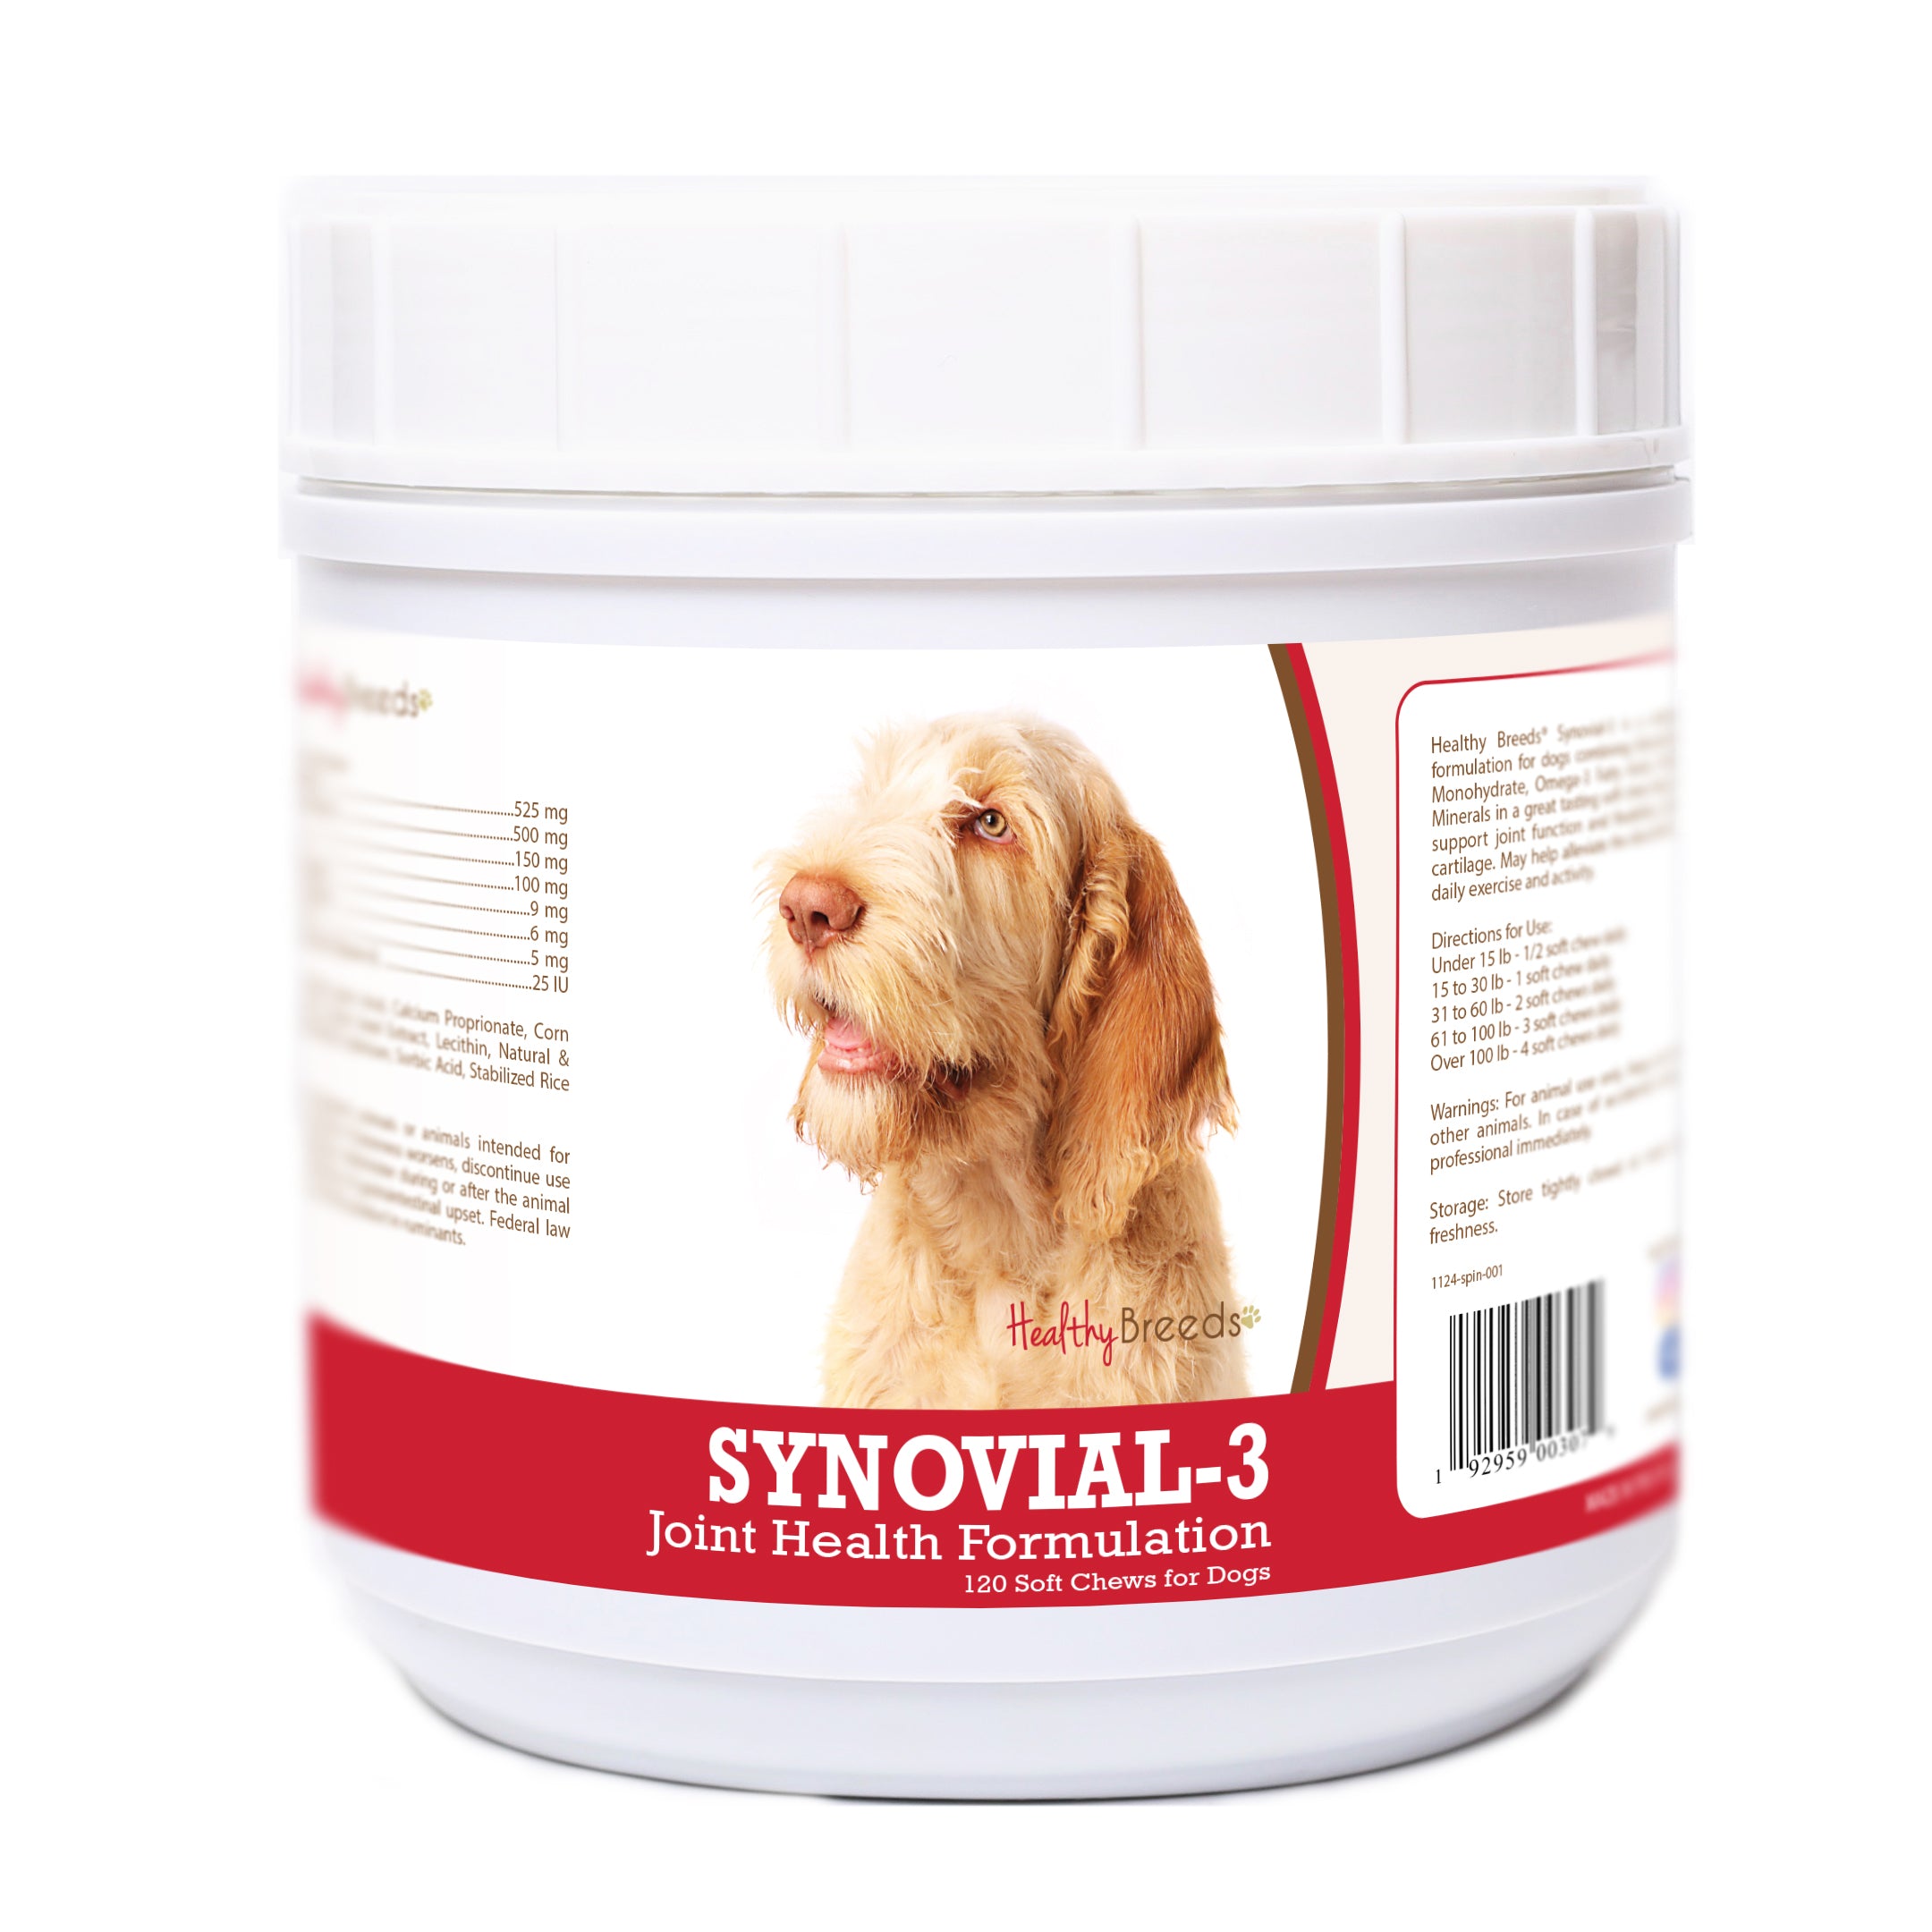 Spinoni Italiani Synovial-3 Joint Health Formulation Soft Chews 120 Count